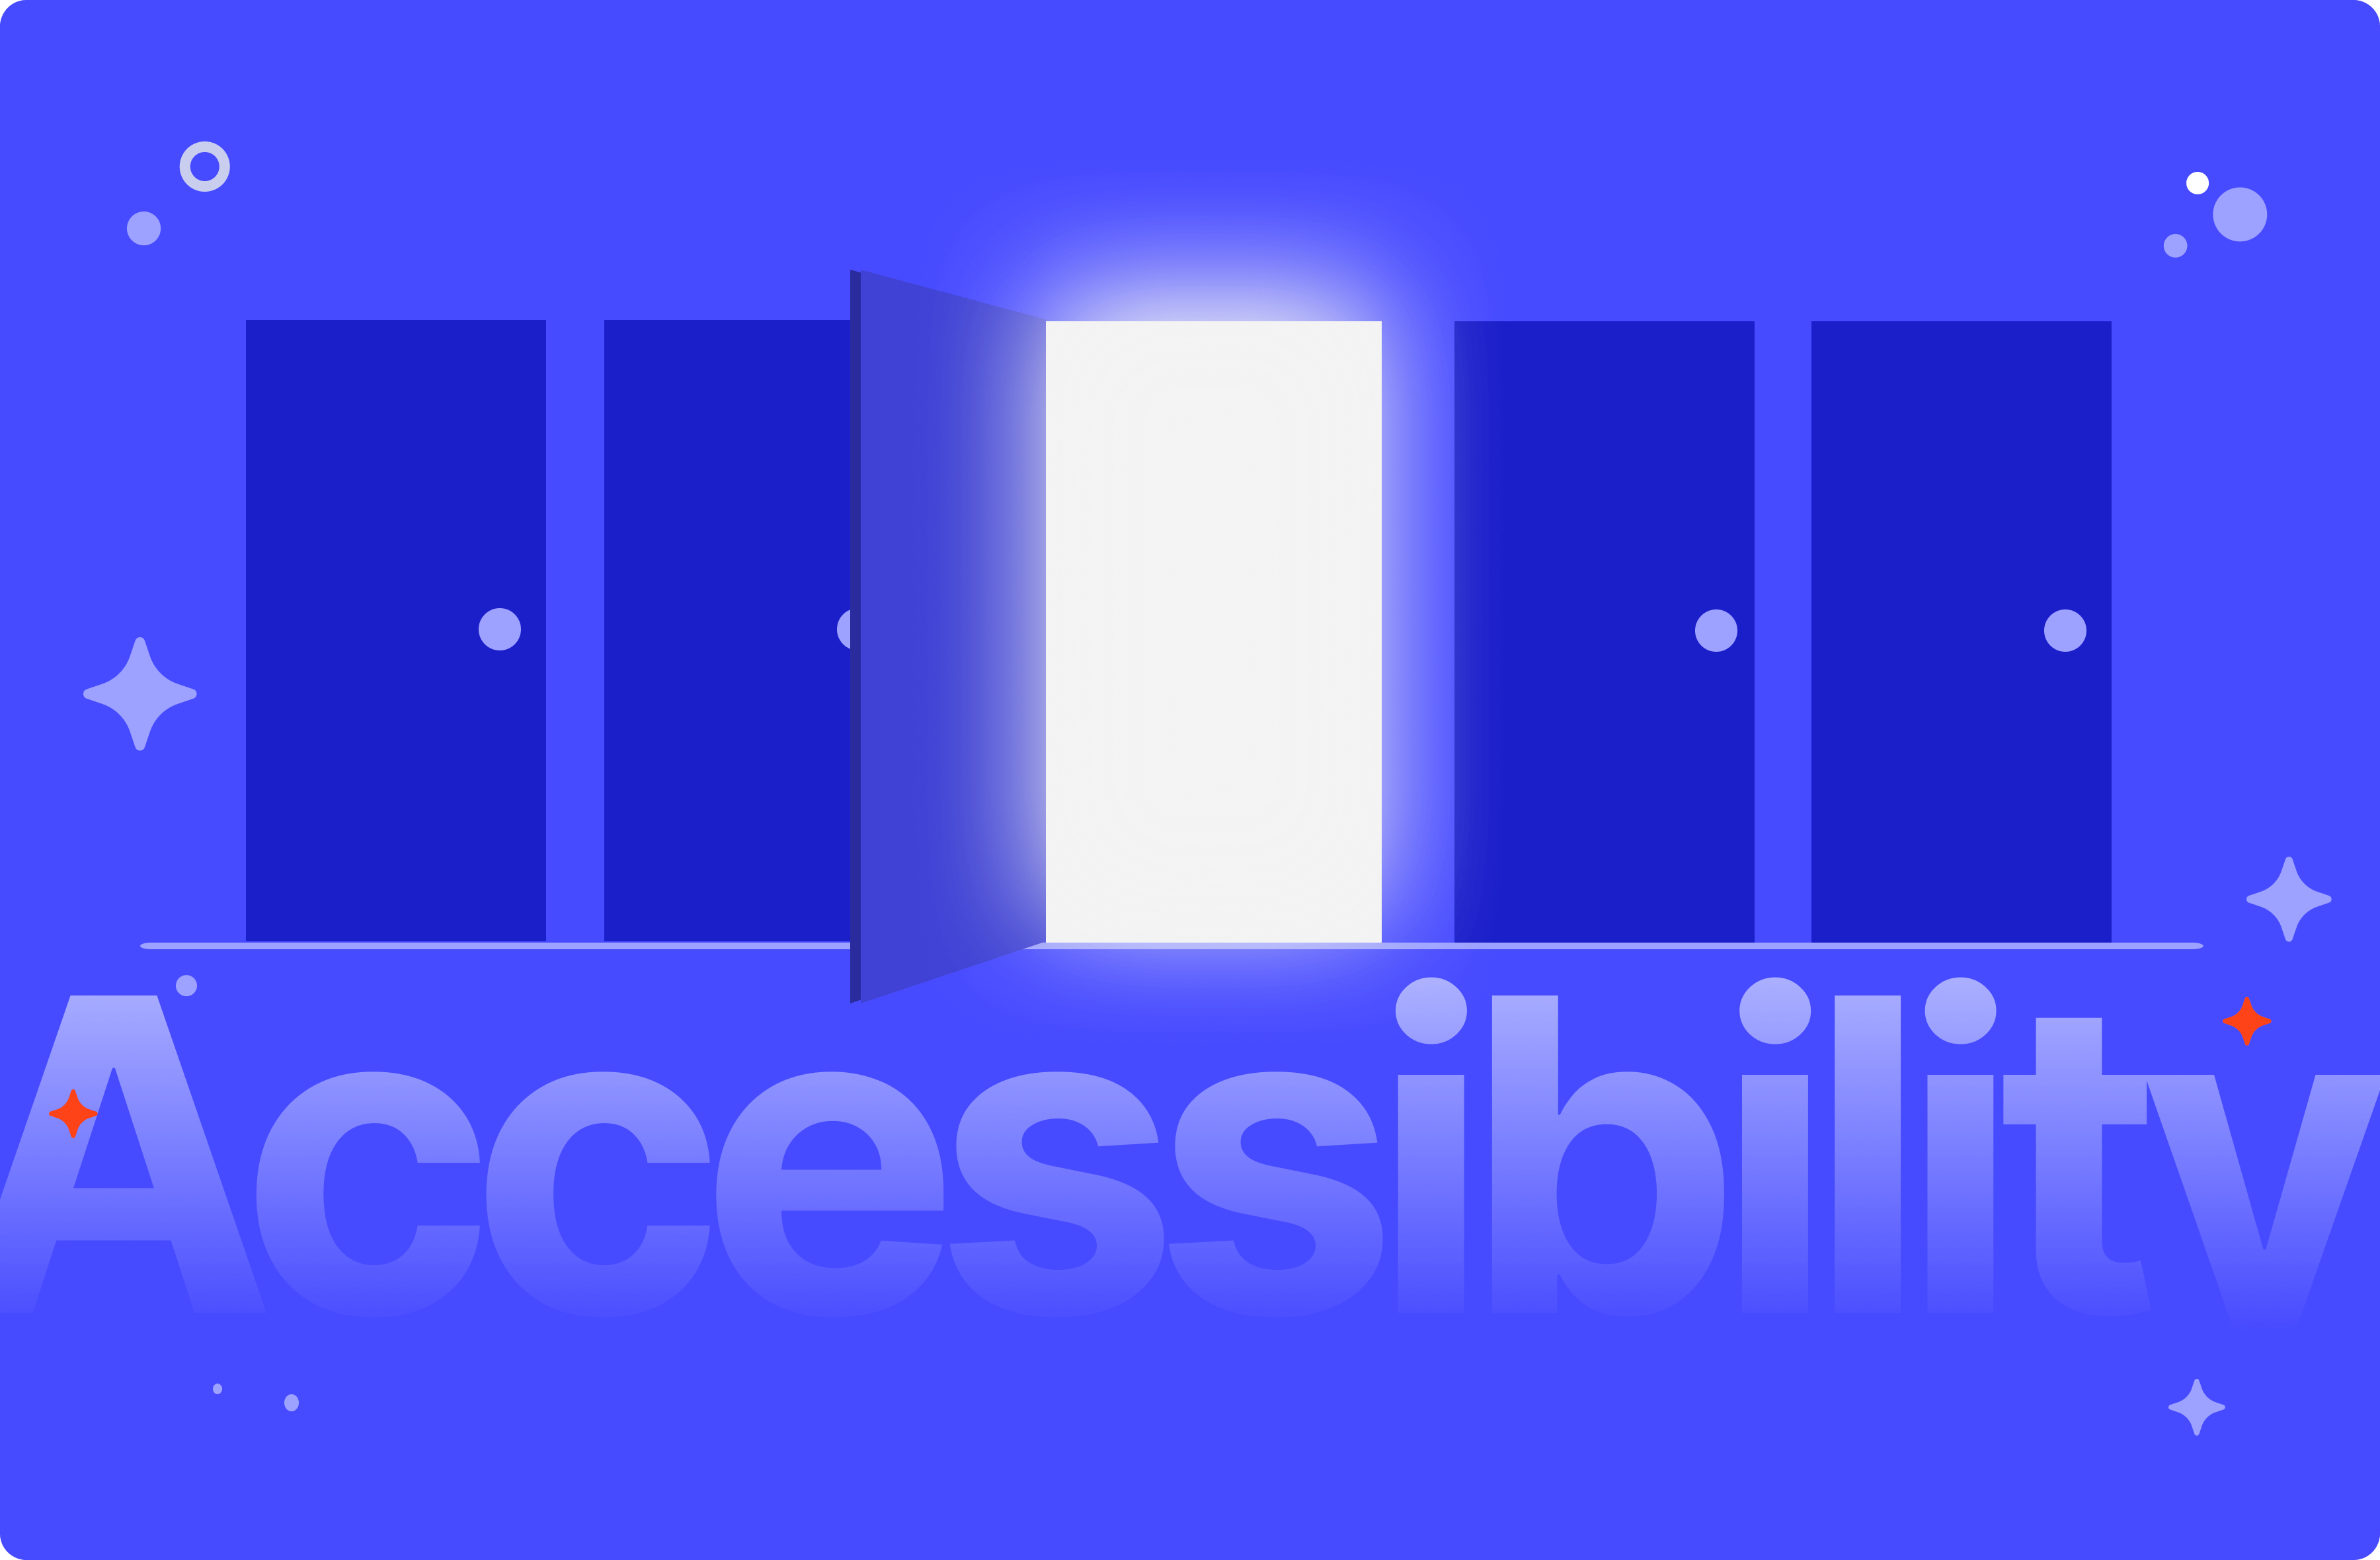 Why is Web Accessibility important for individuals, businesses, and society?